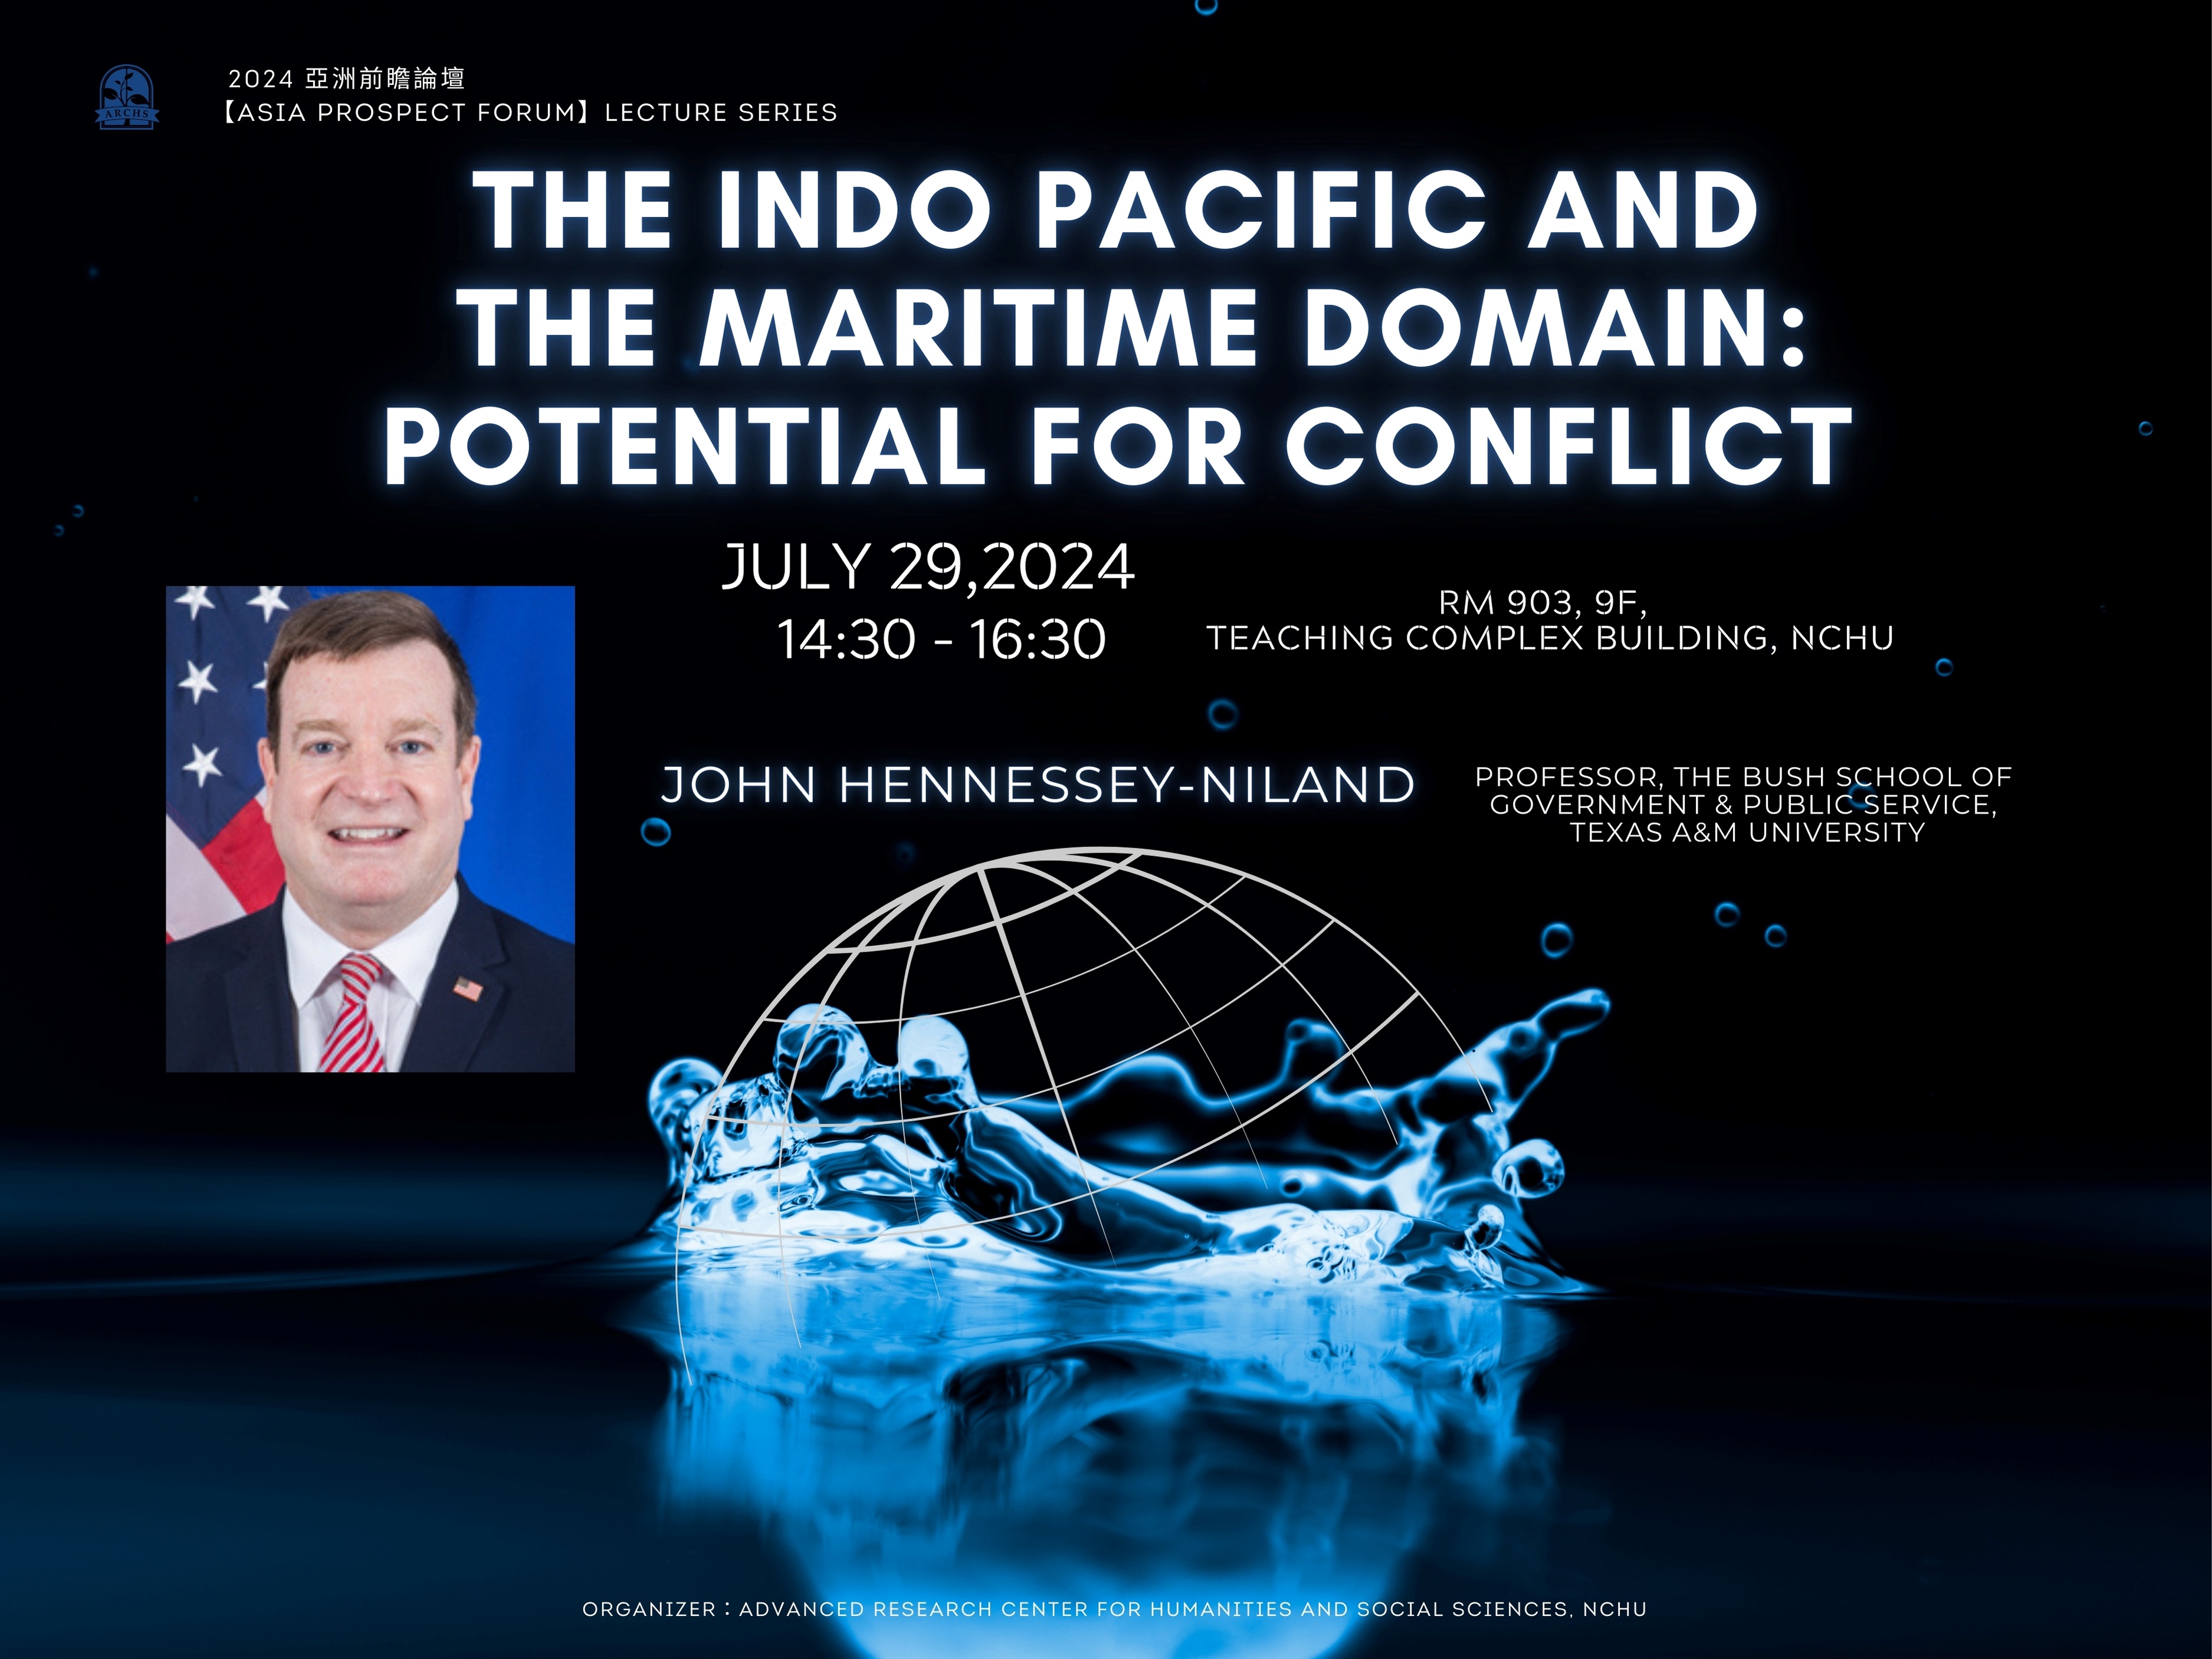 The Indo Pacific and the Maritime Domain: Potential for Conflict